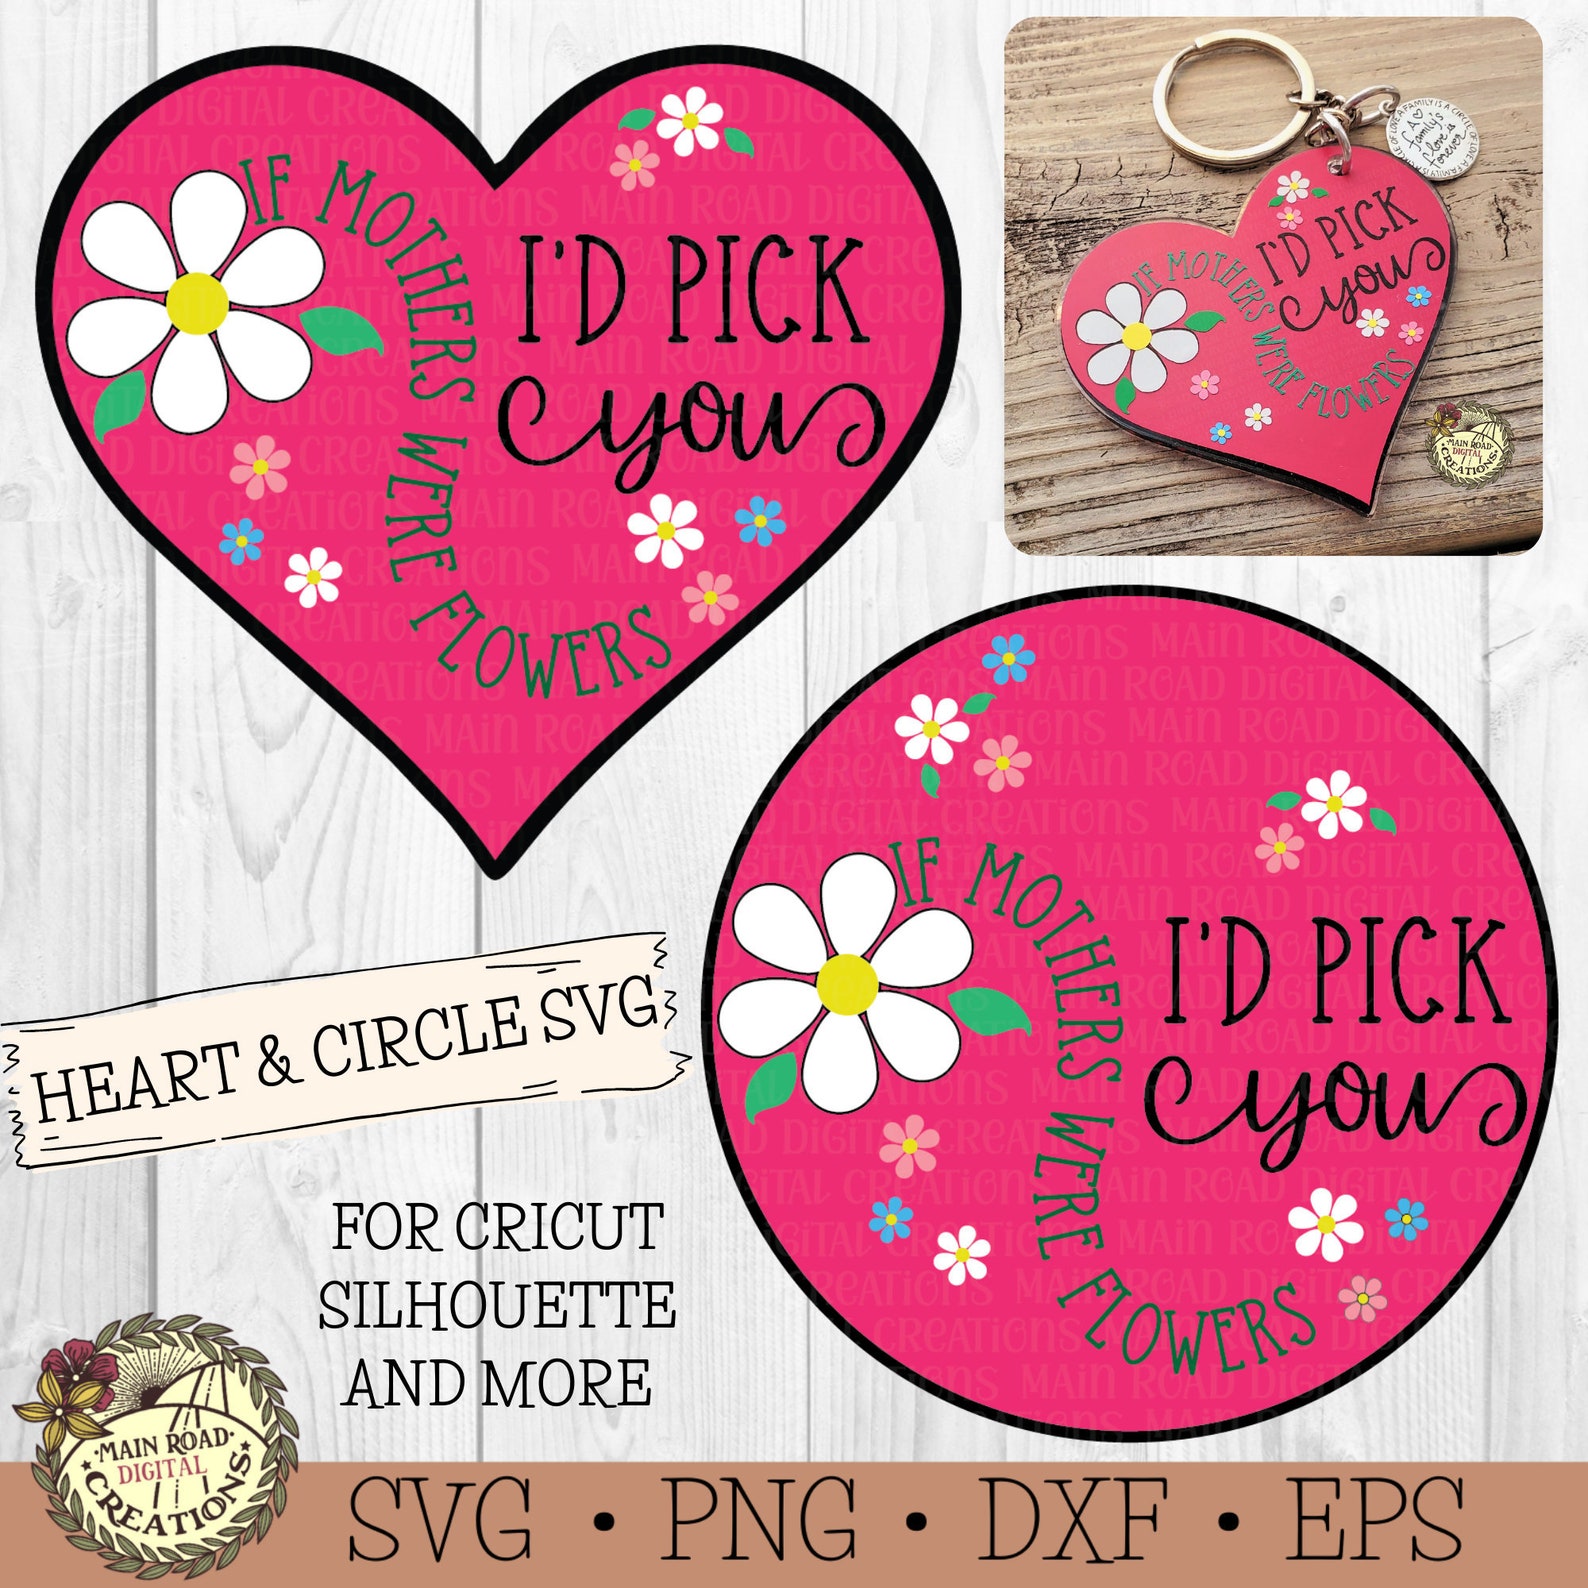 if-mothers-were-flowers-i-d-pick-you-keychain-svg-2-etsy